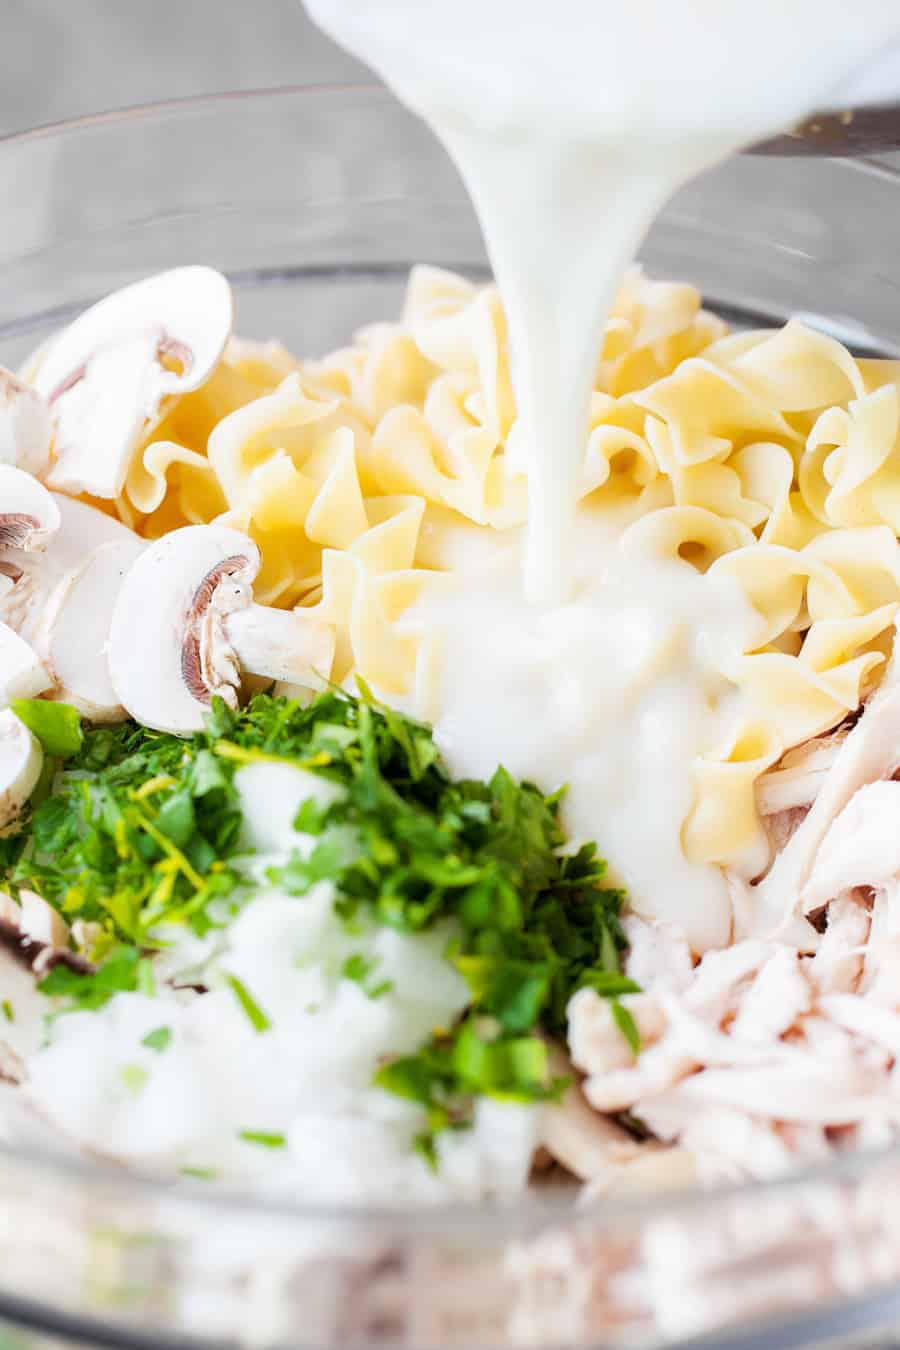 Amish Chicken and Noodles Casserole with a Savory White Sauce